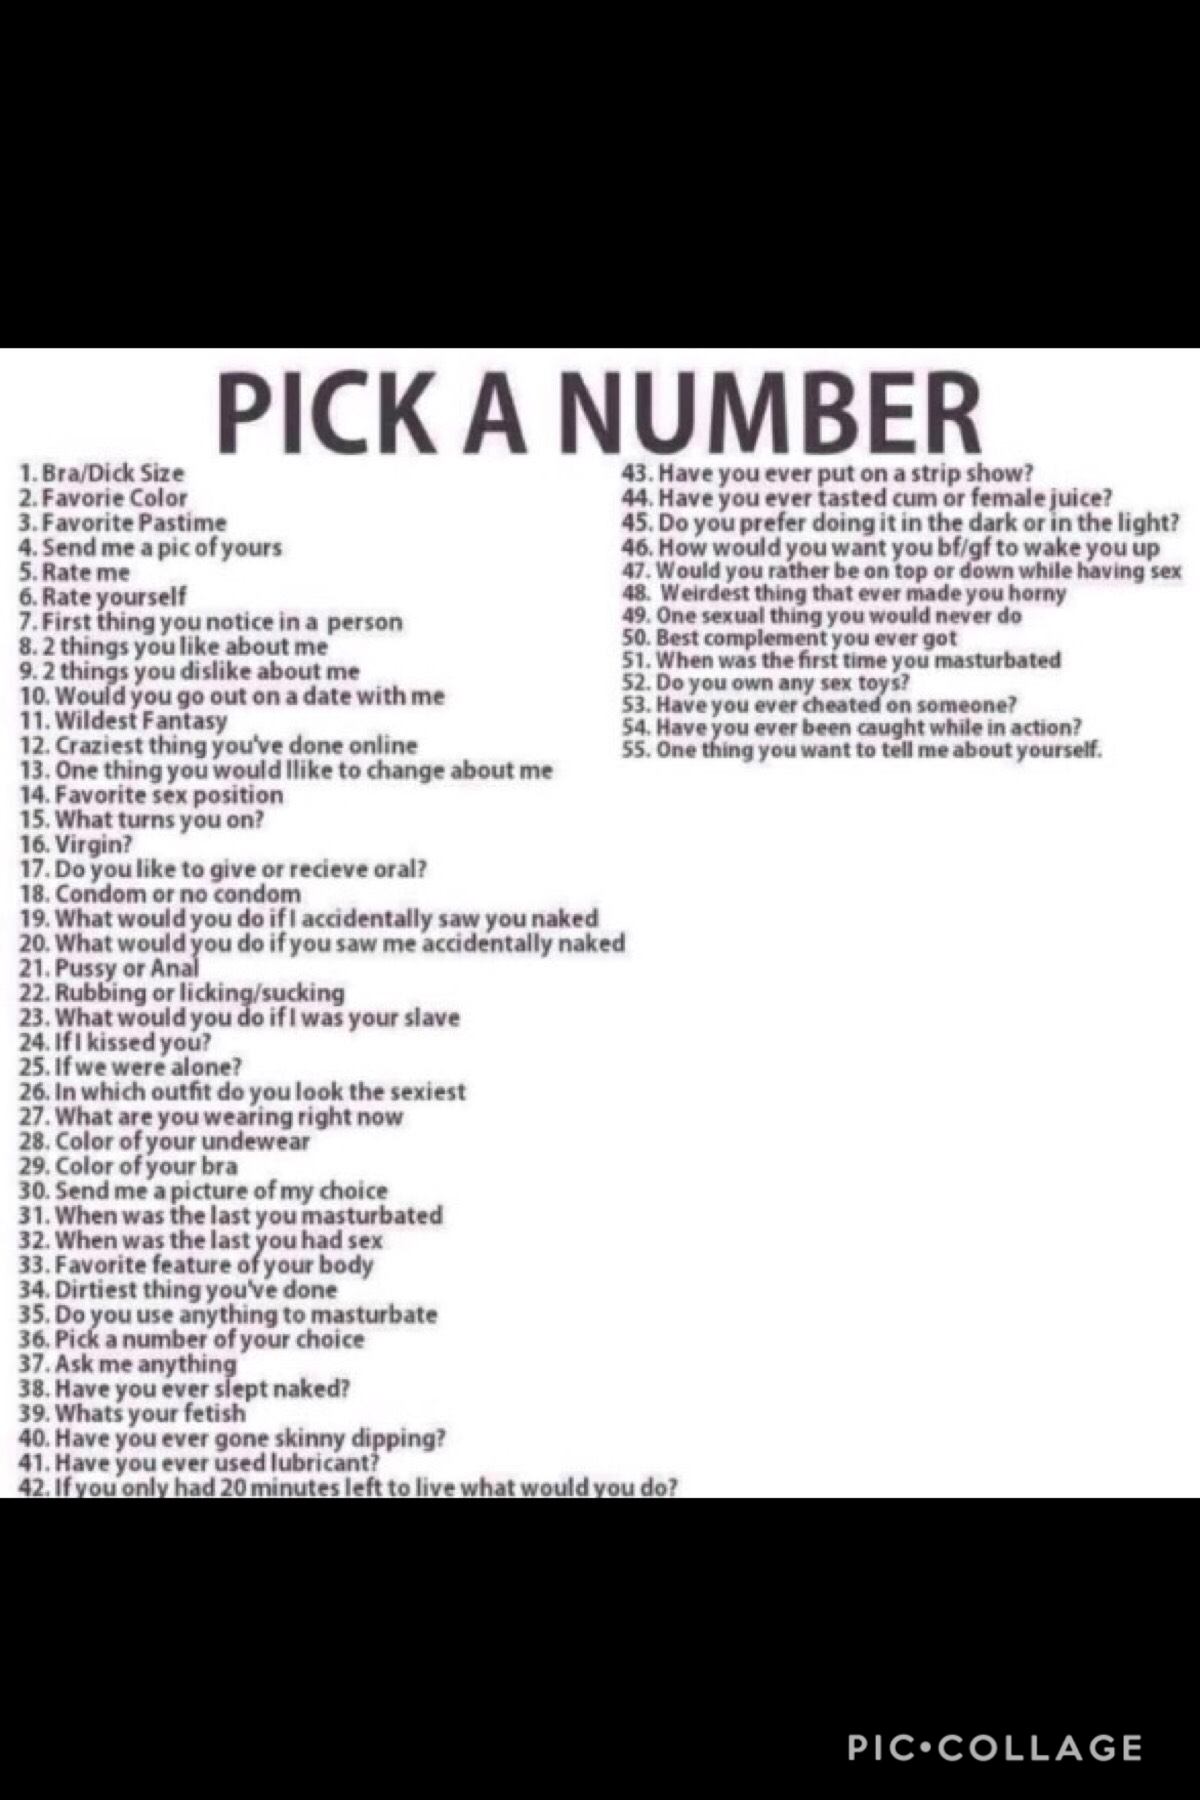 Comment your number.